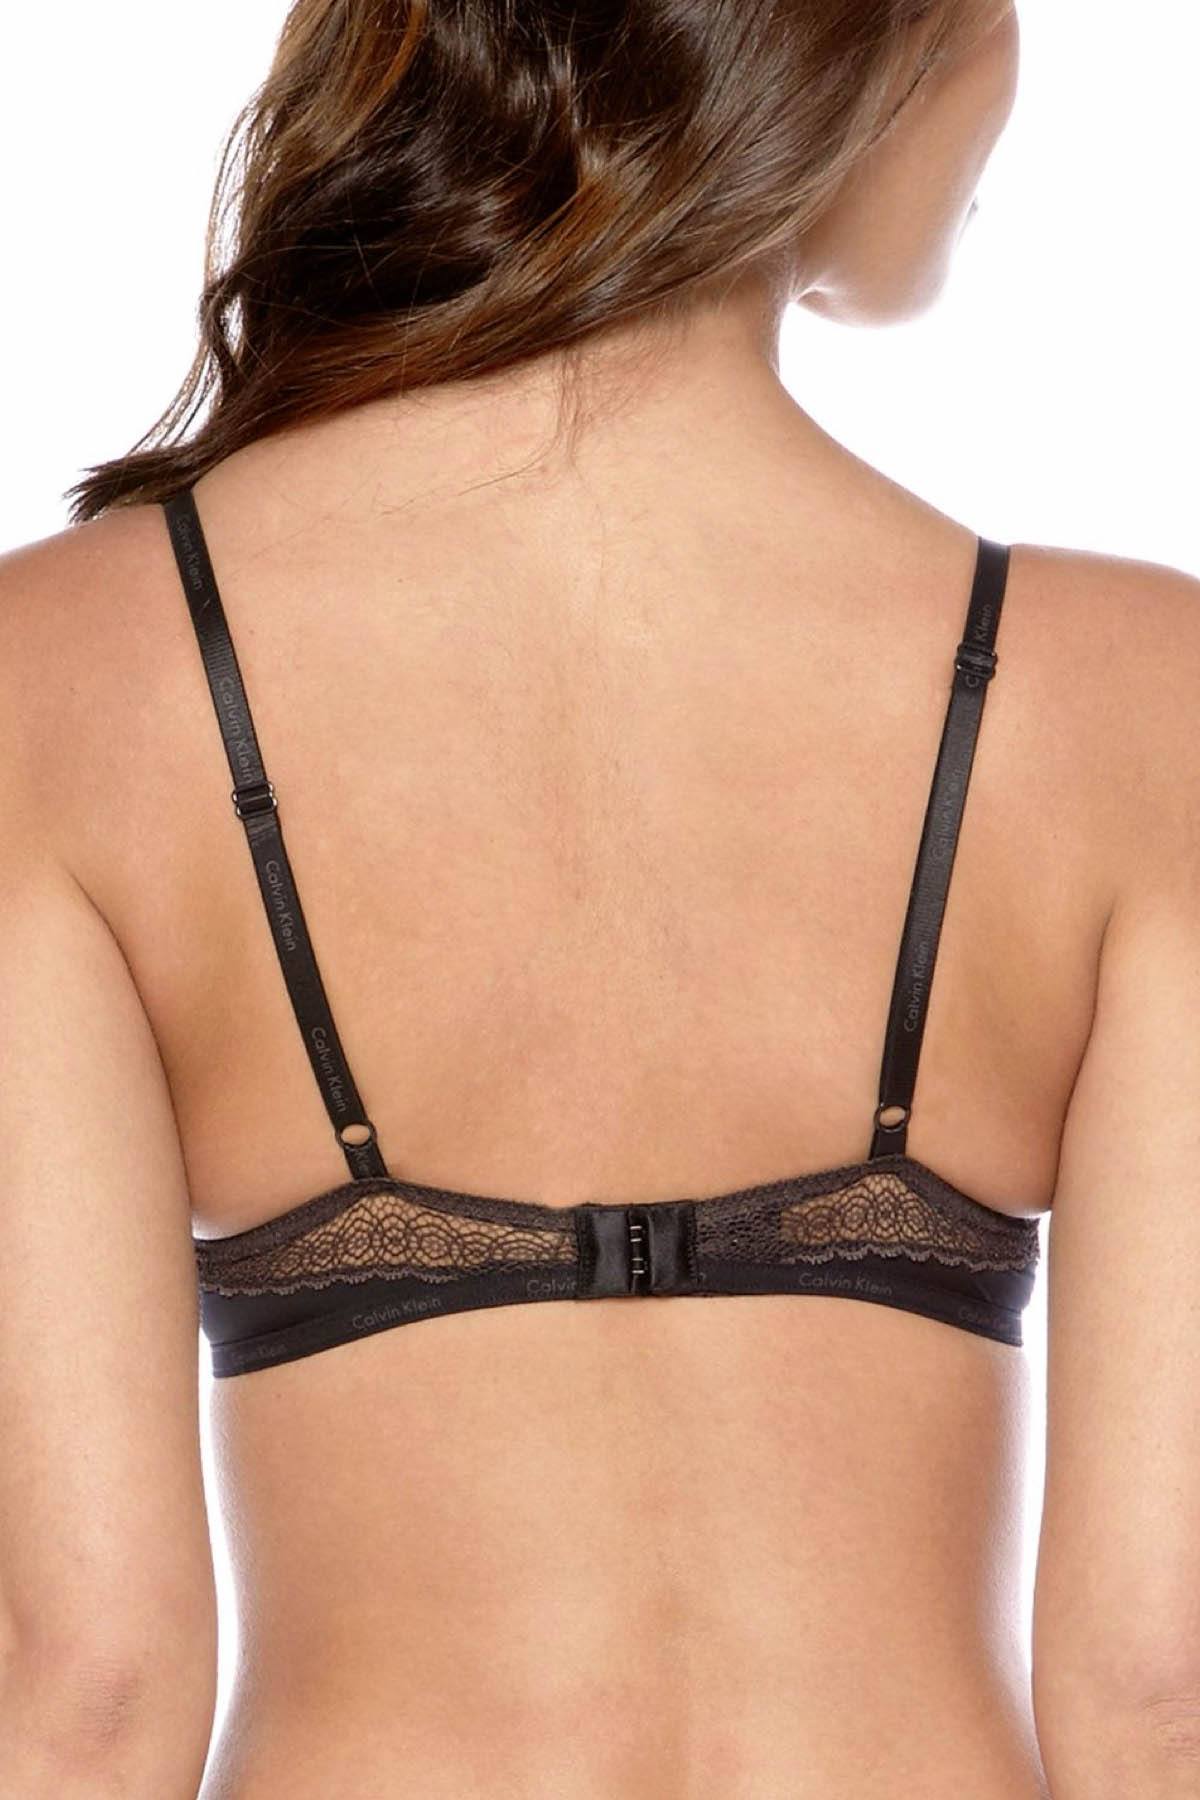 Calvin Klein Black Perfectly-Fit Sexy Signature Unlined Underwire Bra